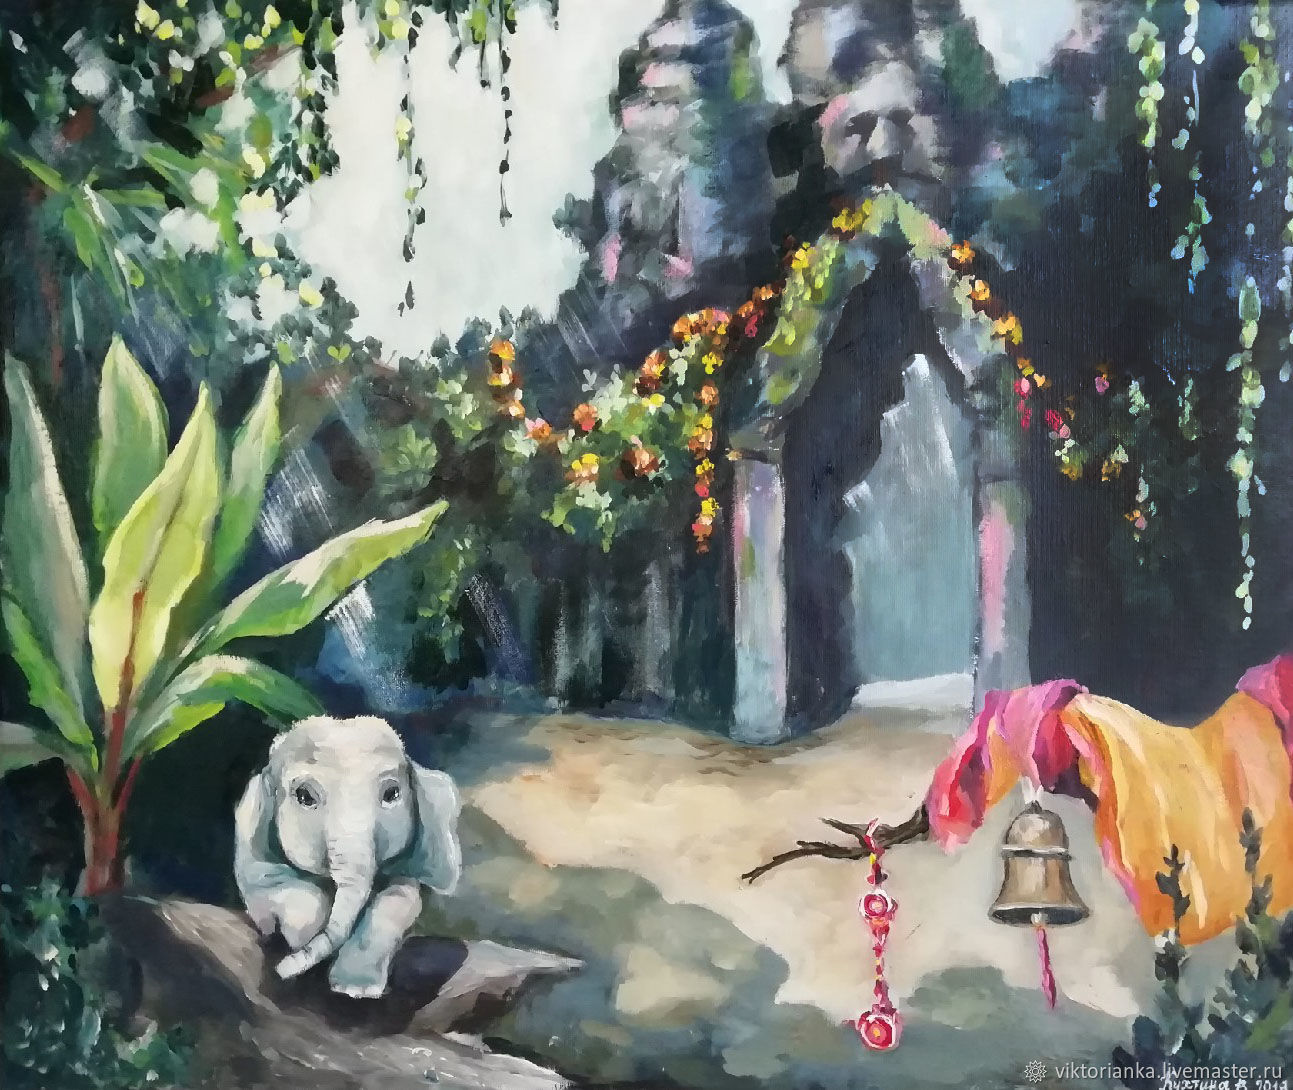 Cambodia oil painting elephant jungle, Pictures, Moscow,  Фото №1